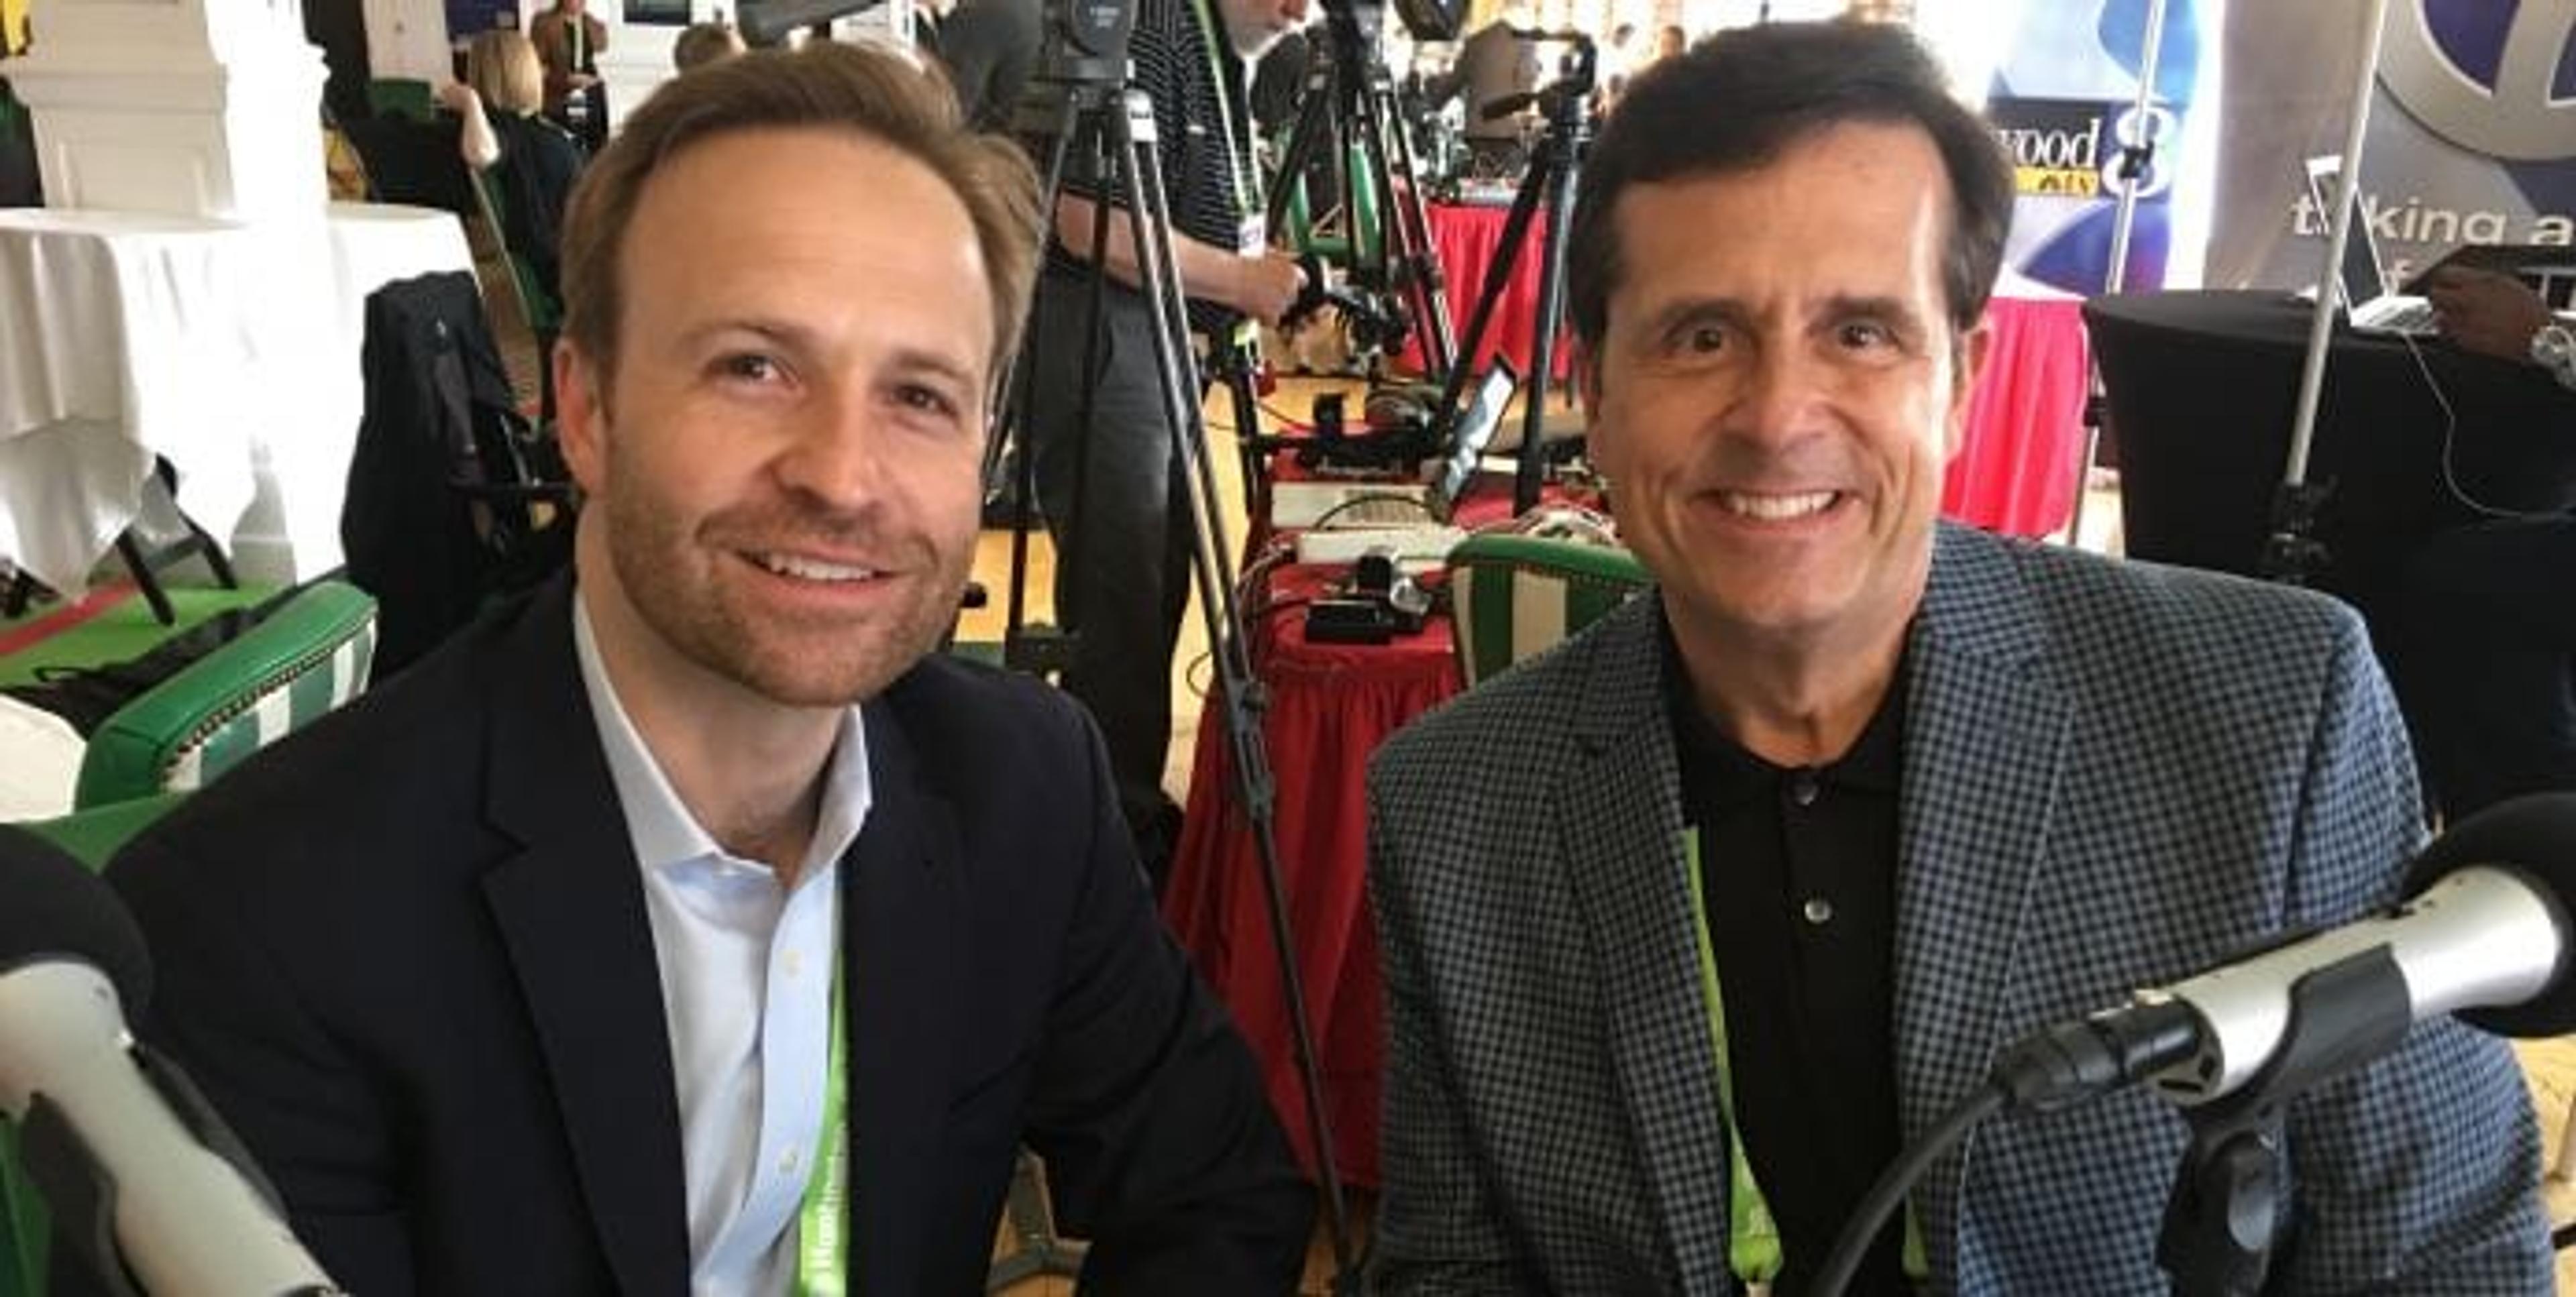 Brian Calley and Chuck Gaidica at the Mackinac Policy Conference